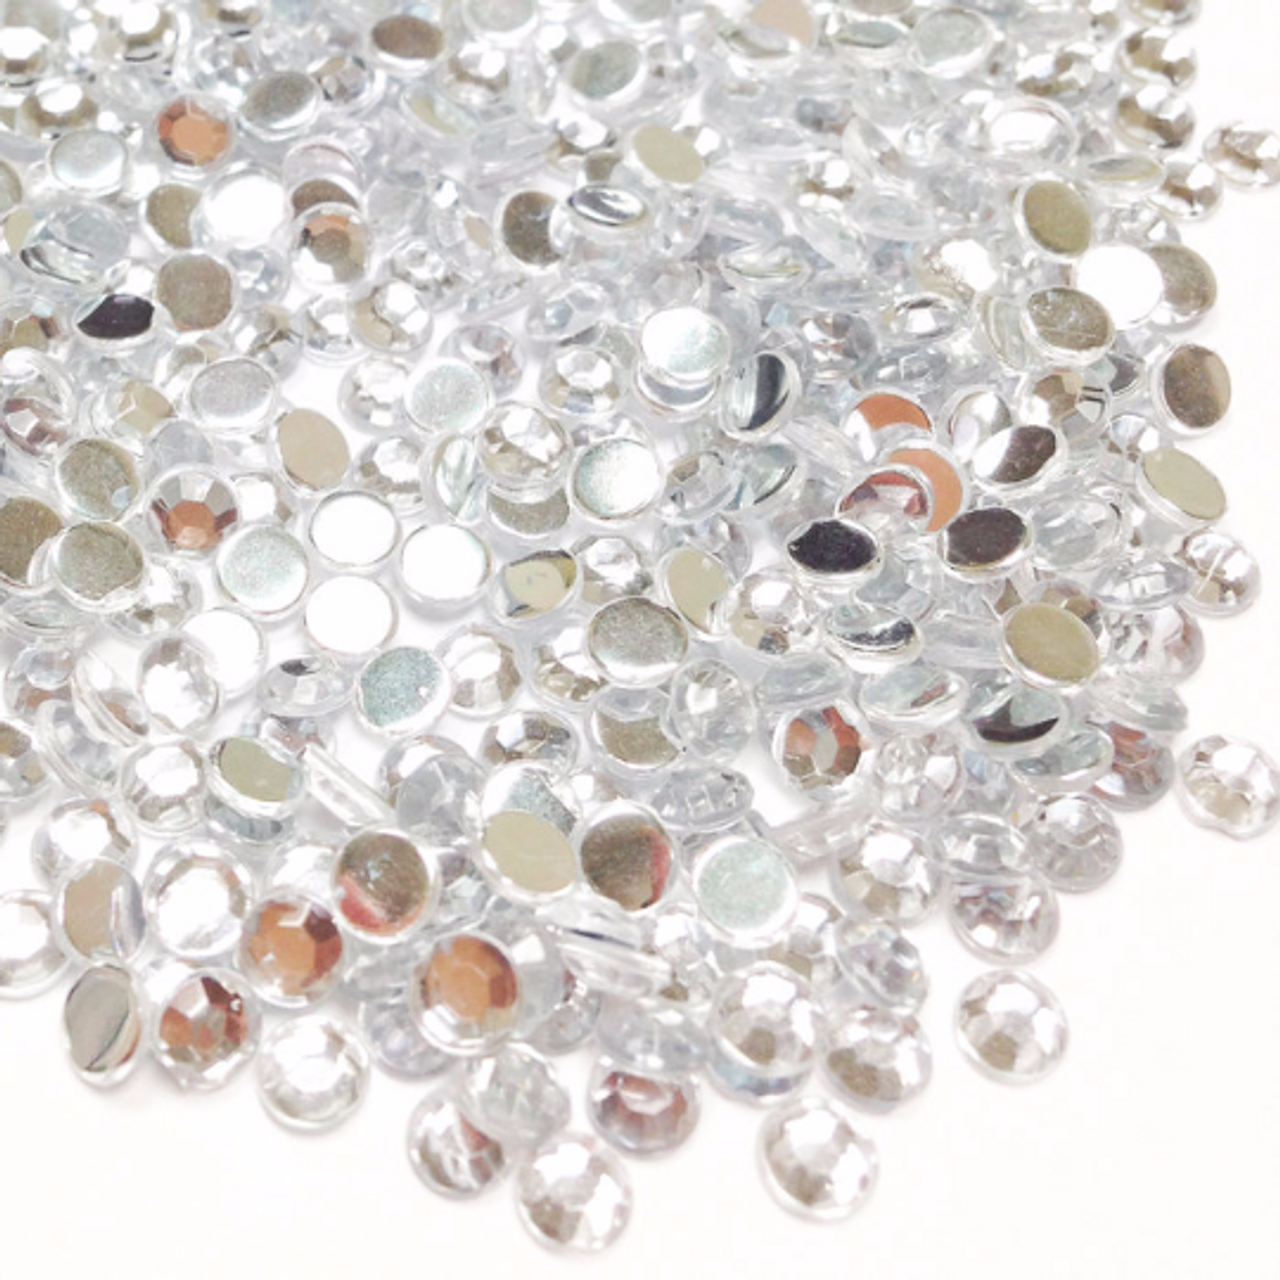 5mm SS20 Clear Wholesale Flat Back Rhinestones - Pack of 10,000